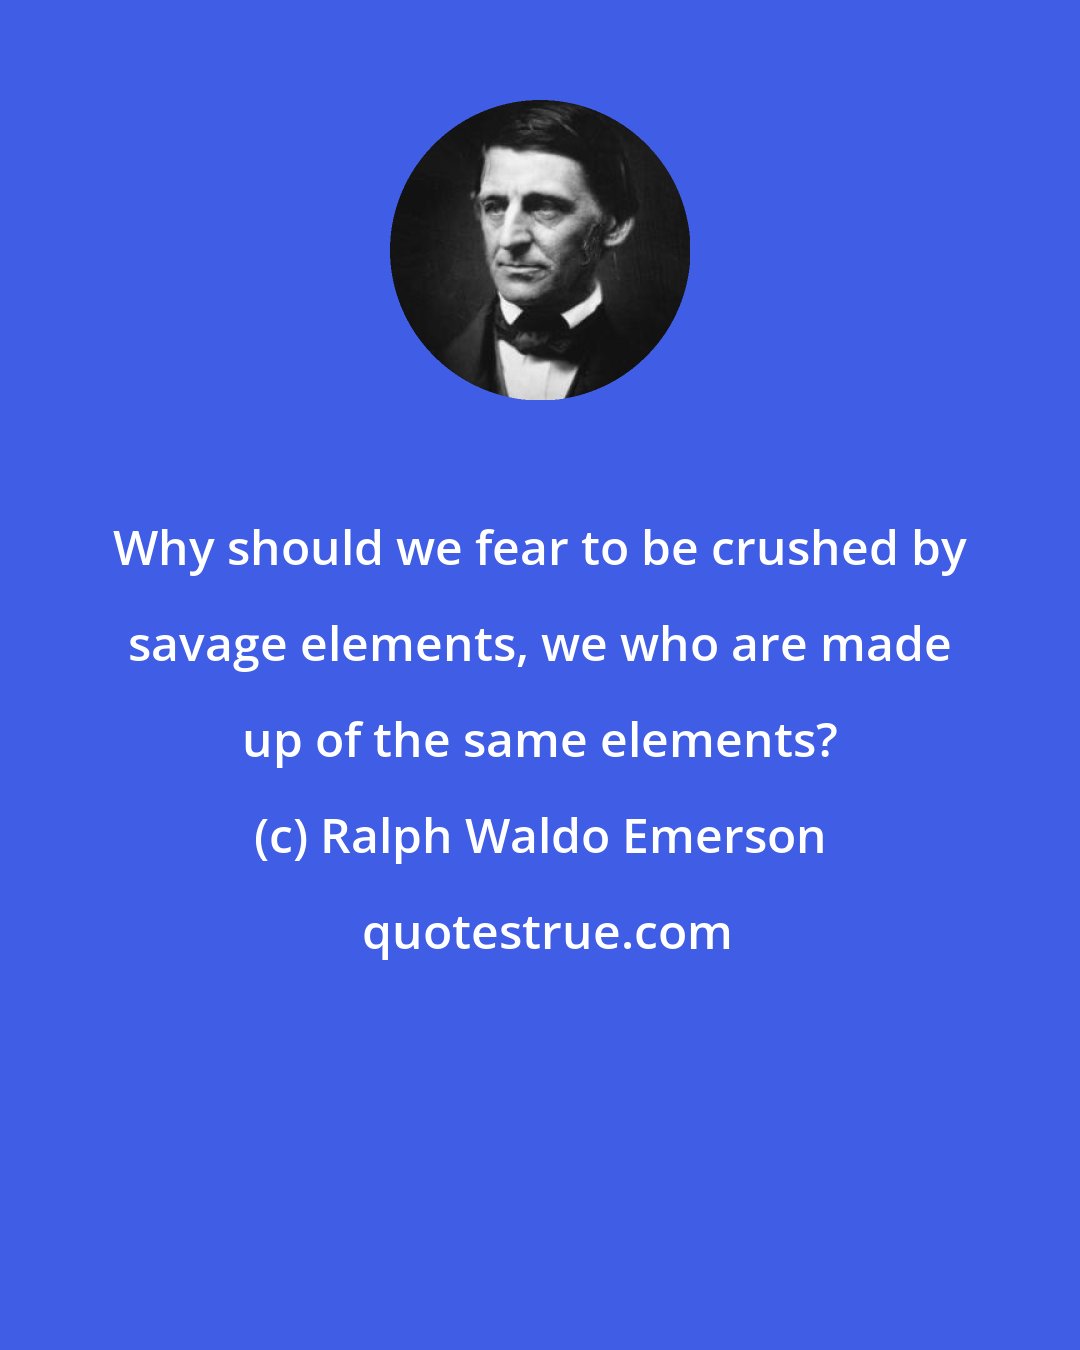 Ralph Waldo Emerson: Why should we fear to be crushed by savage elements, we who are made up of the same elements?